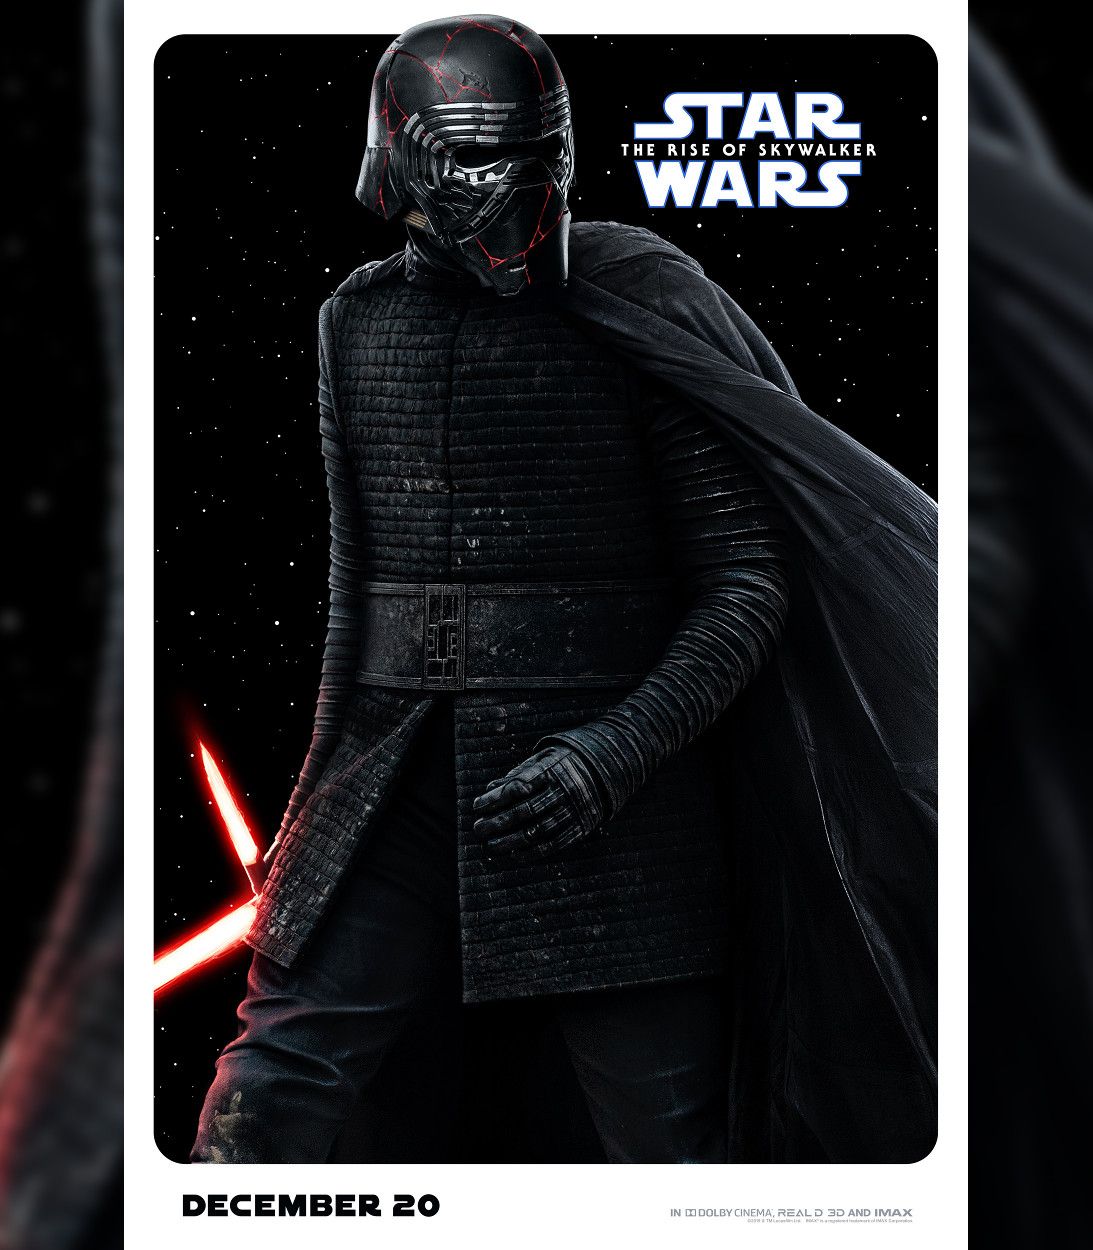 Star Wars The Rise Of Skywalker Character Poster Kylo Ren